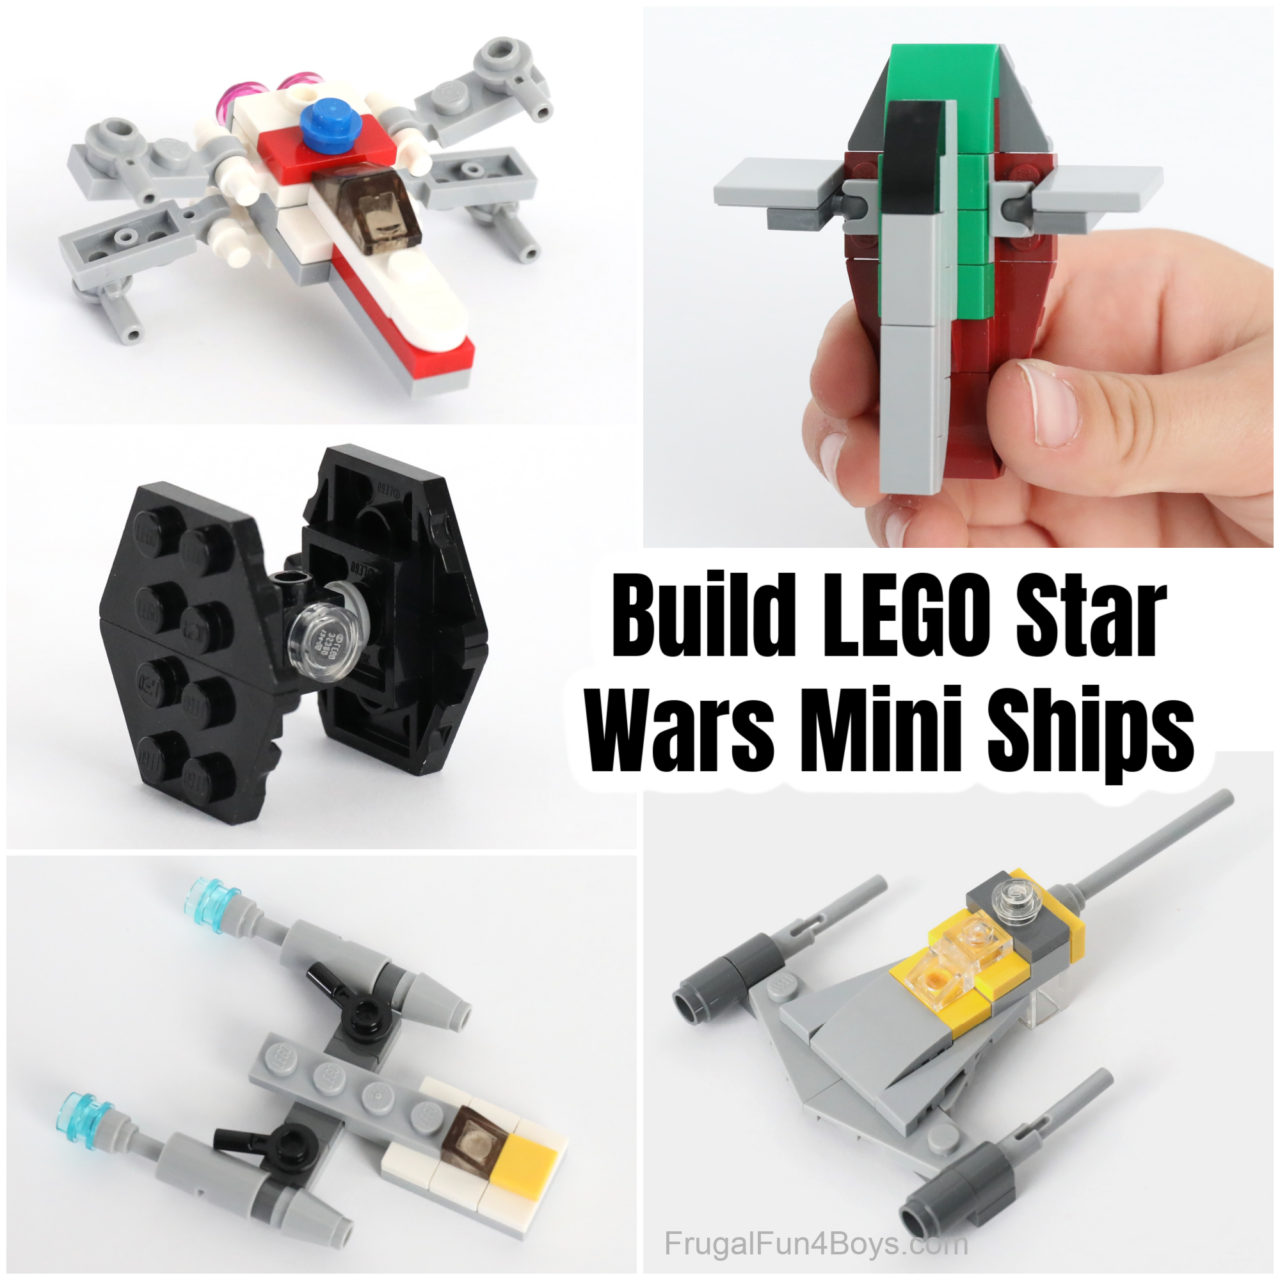 Build Own LEGO Mini Wars - Frugal Fun For Boys and Girls